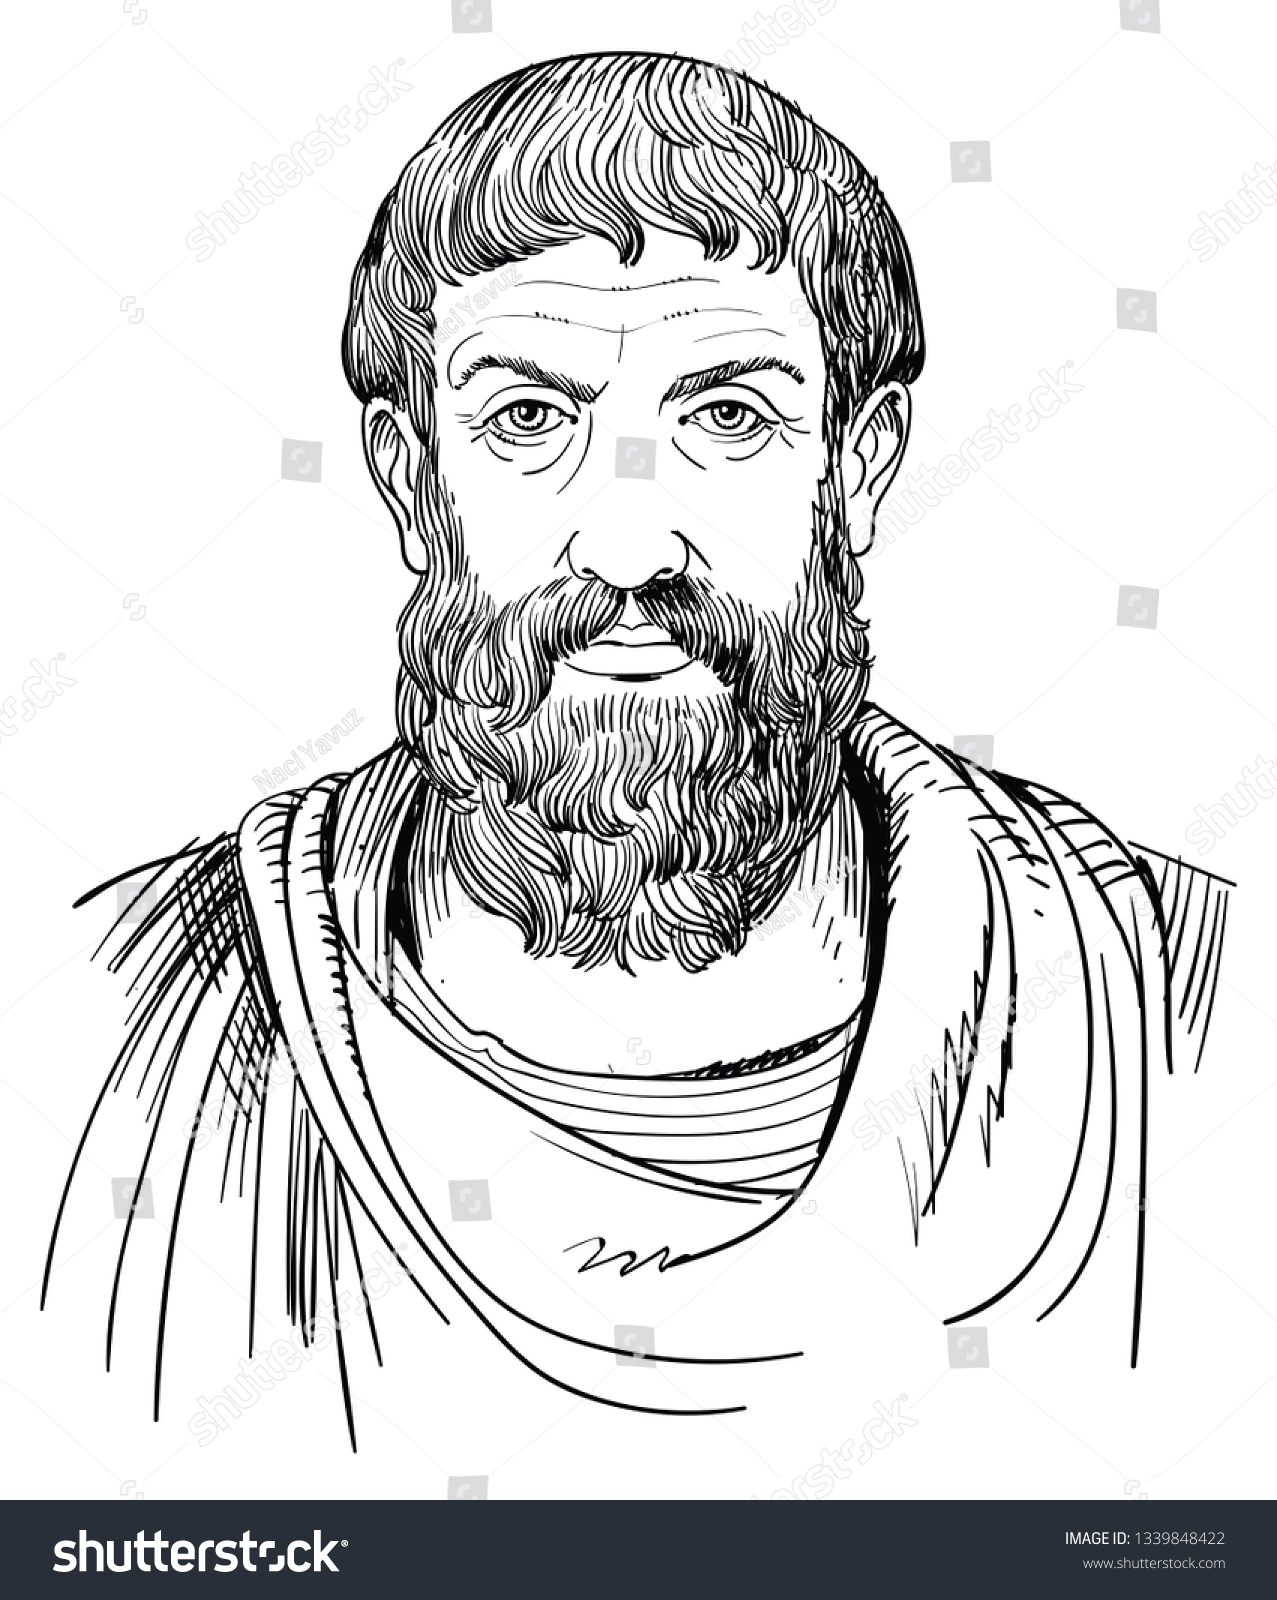 SVG of Epicurus (341-270 BC) portrait in line art. He was Greek philosopher, founder of Epicureanism who held that the highest good is pleasure and the world is a series of fortuitous combinations of atoms. svg